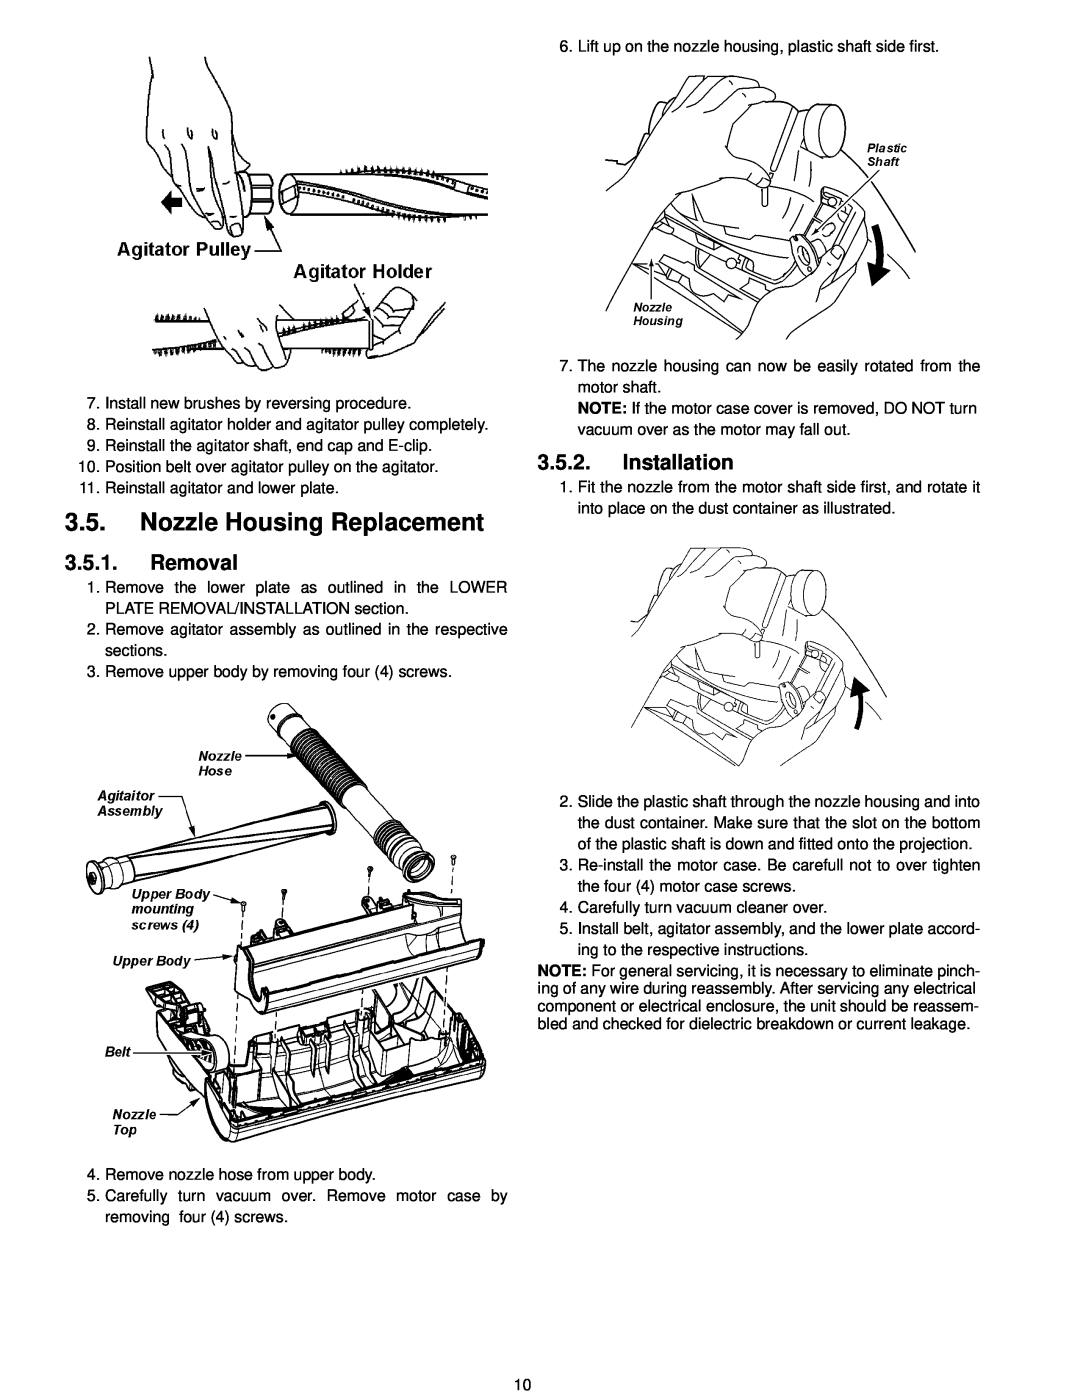 Panasonic MC-V5210-00 specifications Nozzle Housing Replacement, Removal, Installation 